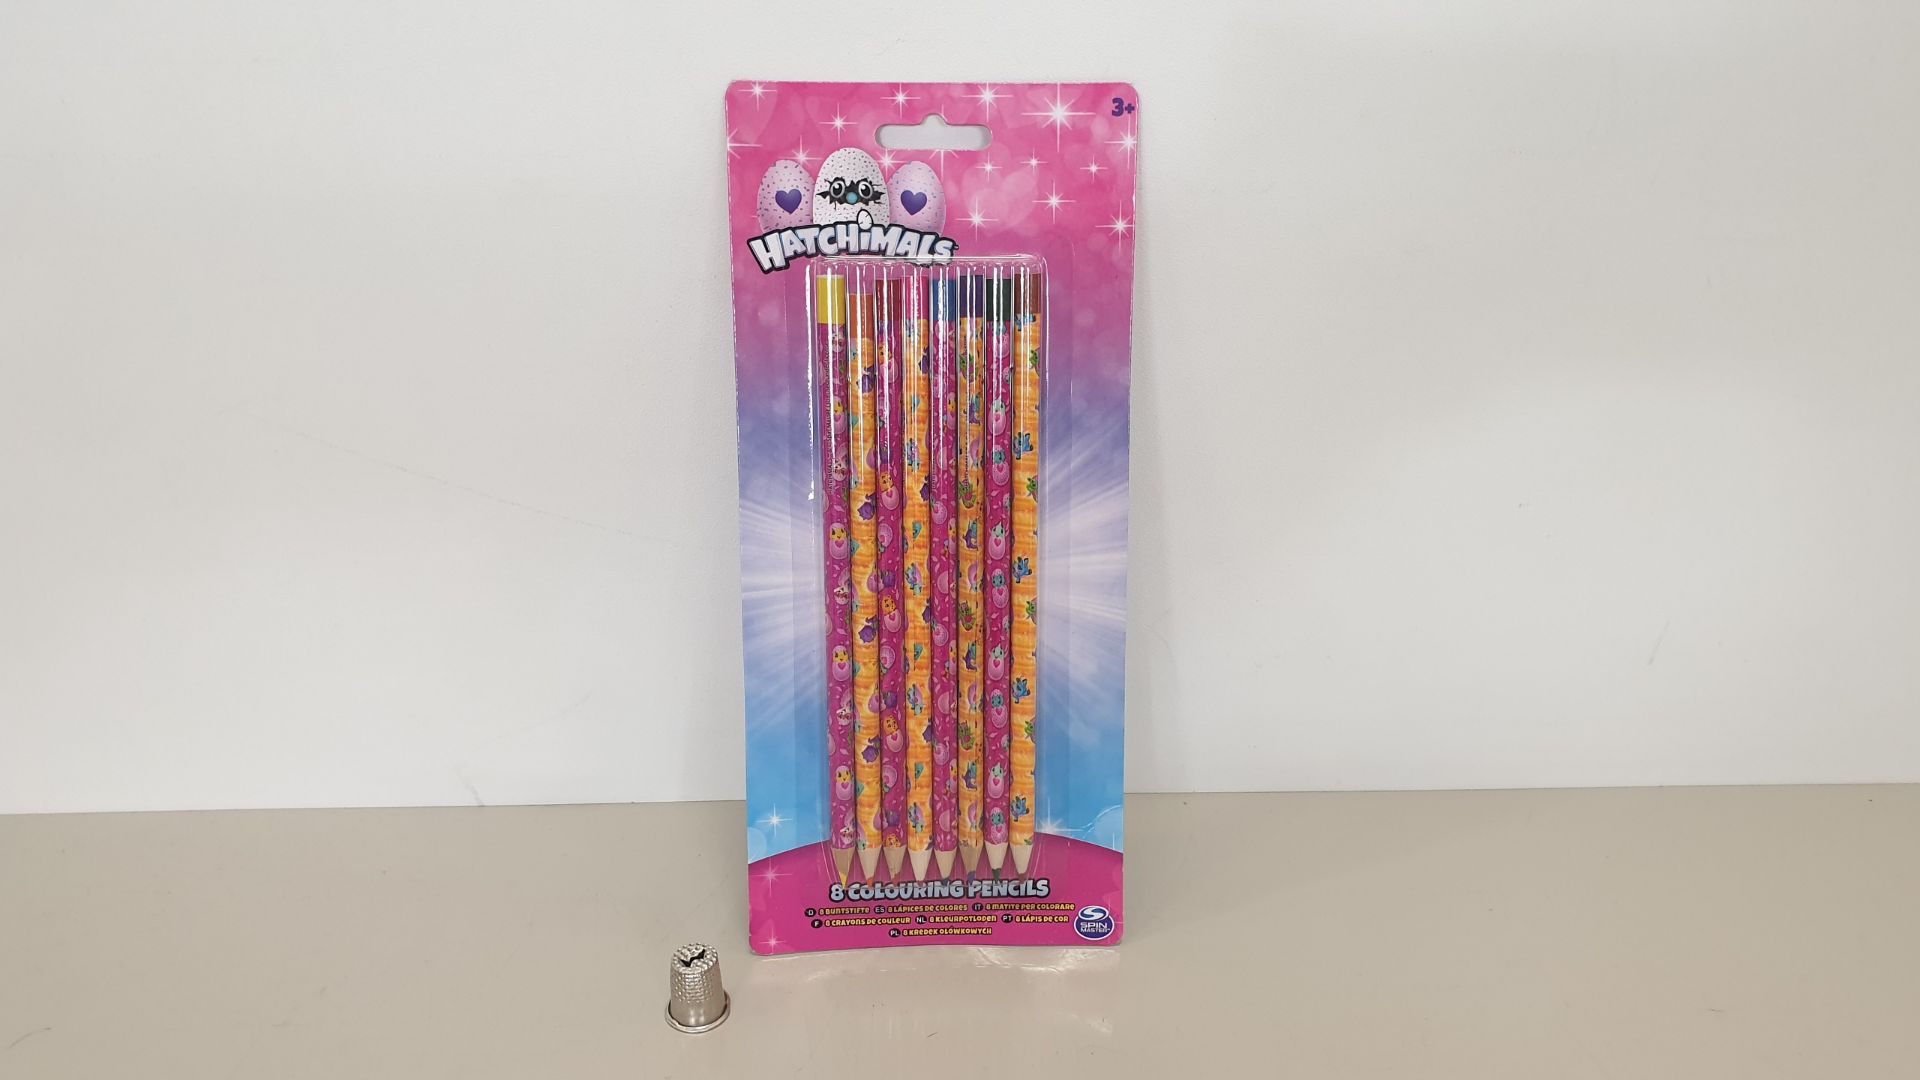 252 X BRAND NEW HATCHIMALS 8 PACK OF COLOURING PENCILS (ALL INDIVIDUALLY PACKAGED) - IN 6 BOXES